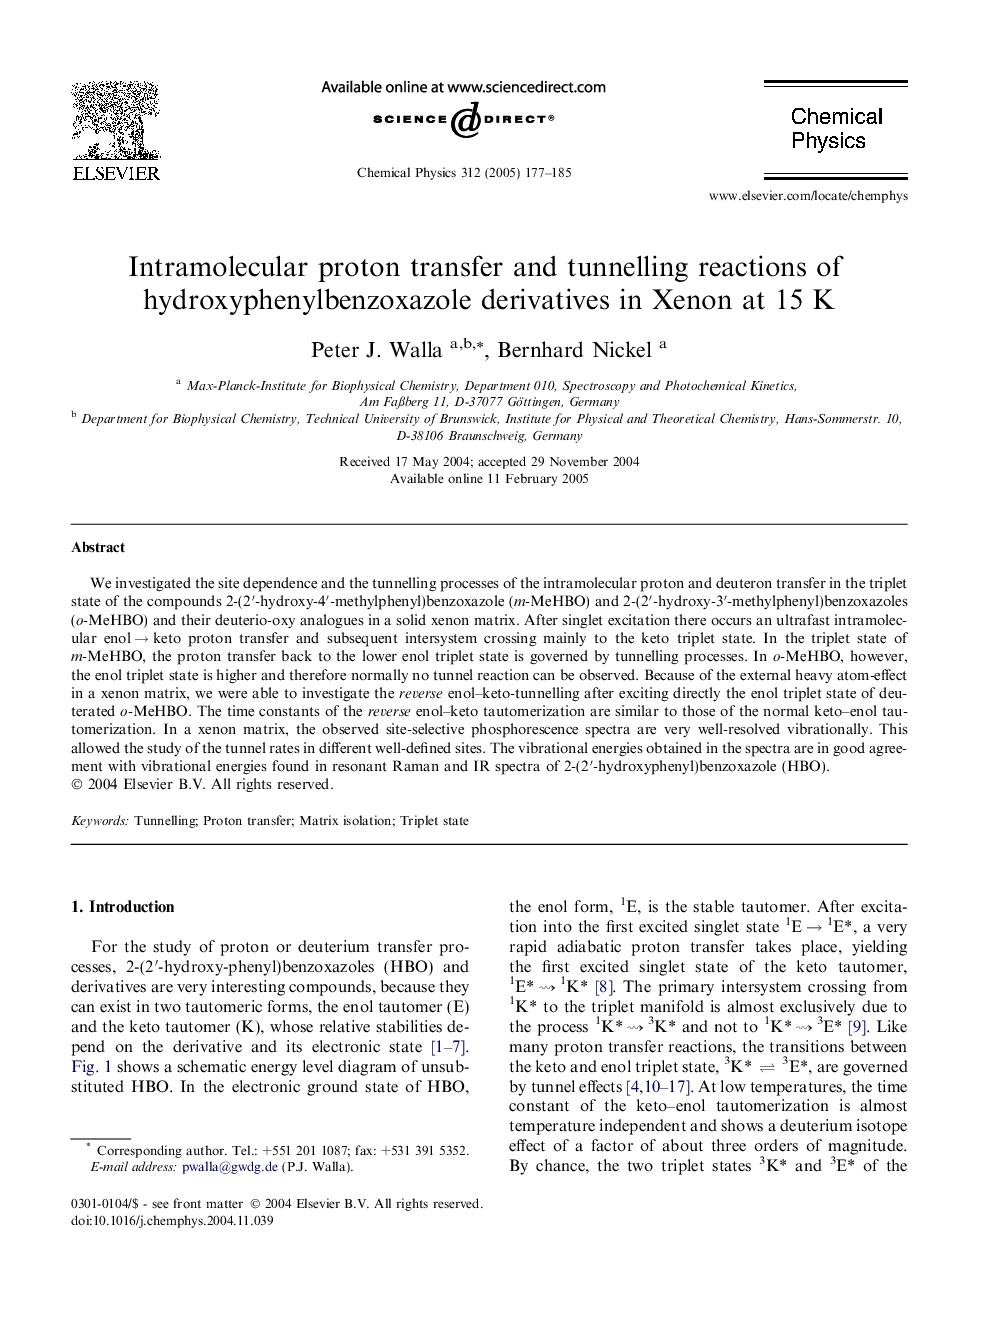 Intramolecular proton transfer and tunnelling reactions of hydroxyphenylbenzoxazole derivatives in Xenon at 15 K